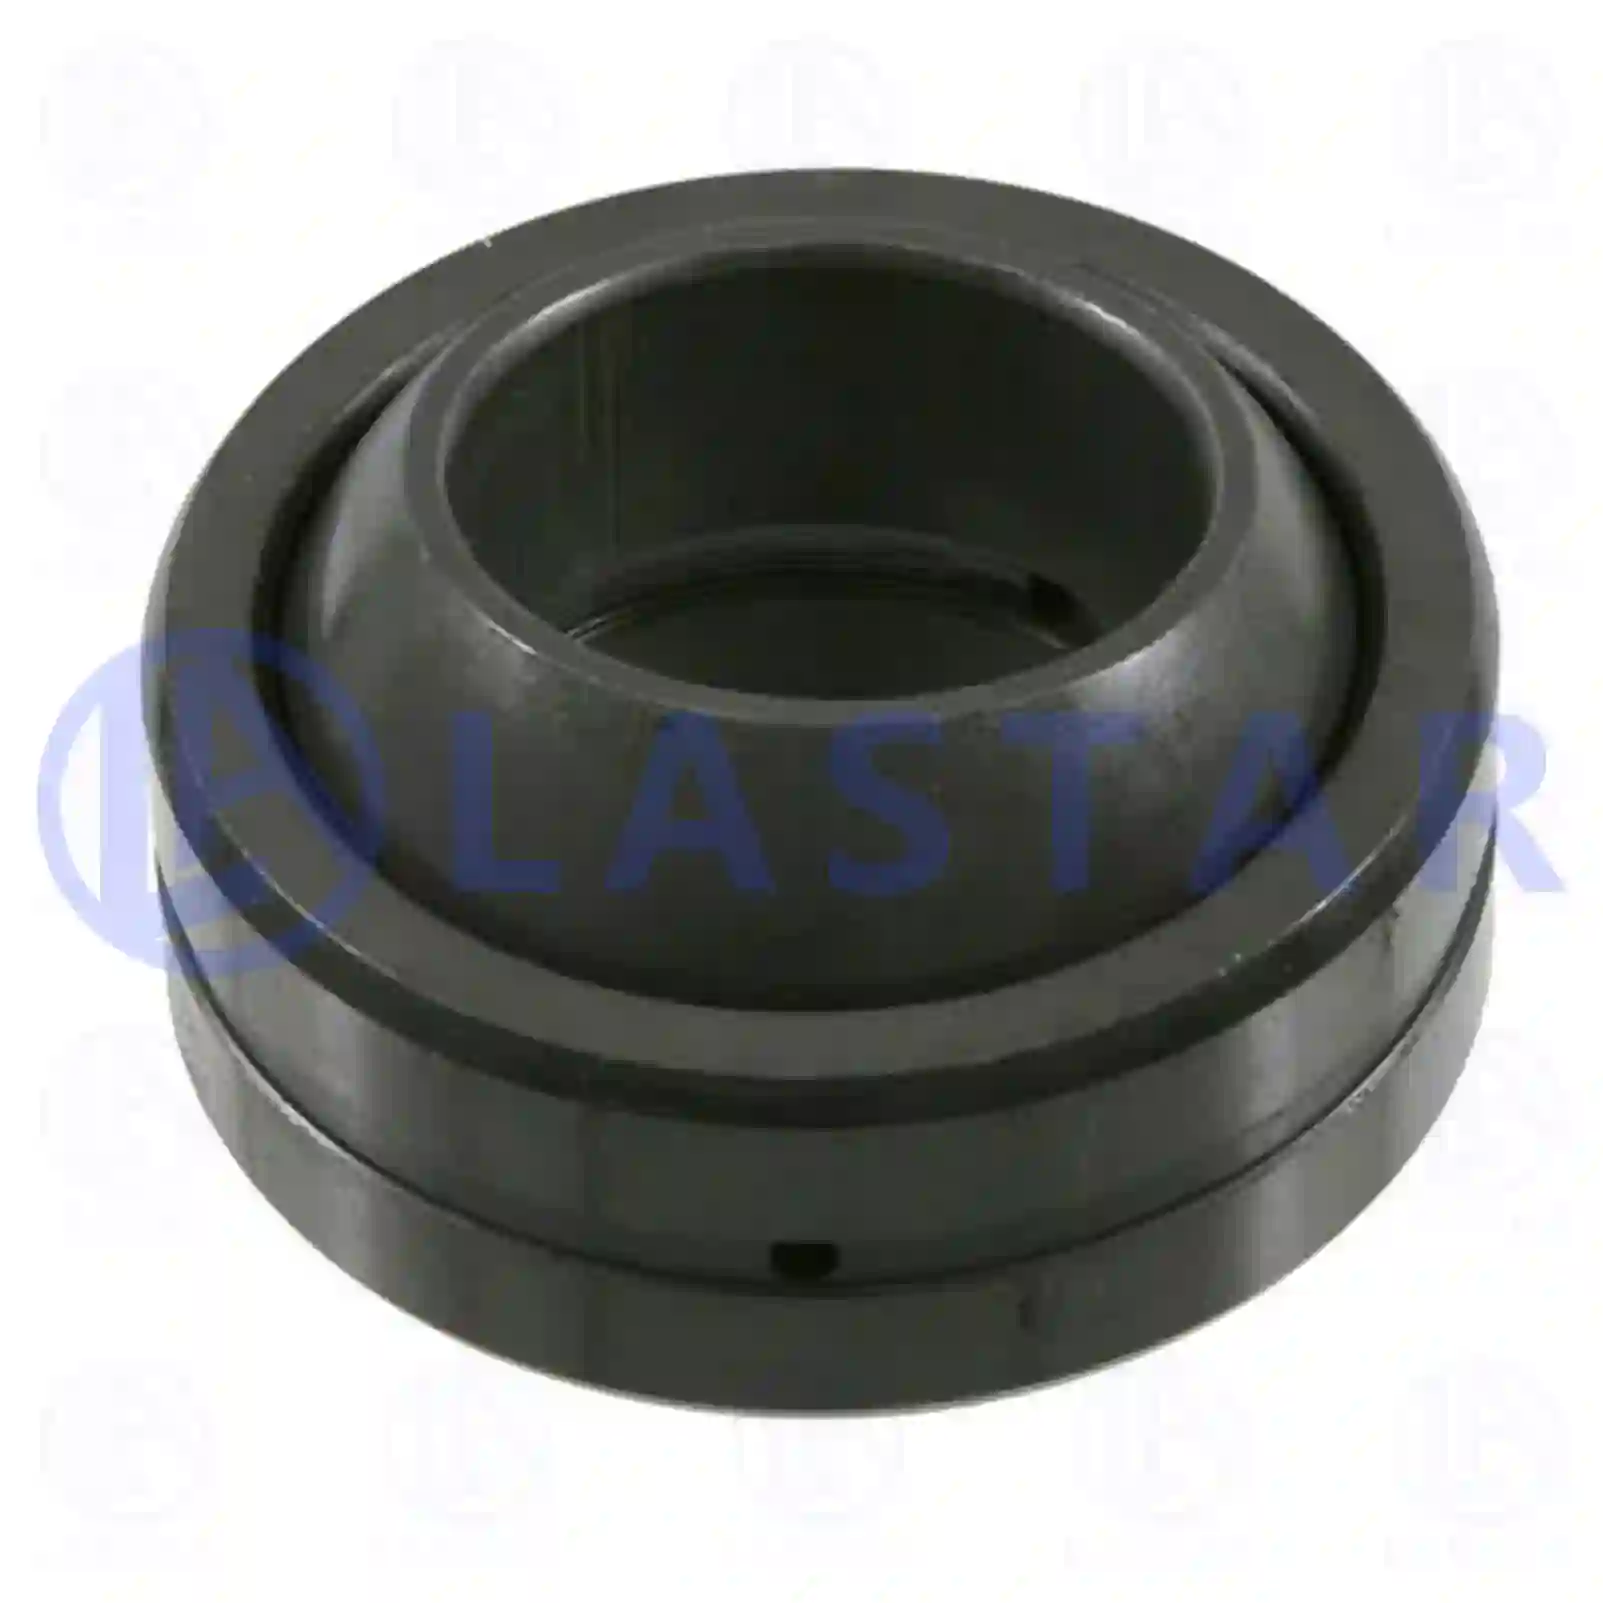  Joint bearing || Lastar Spare Part | Truck Spare Parts, Auotomotive Spare Parts